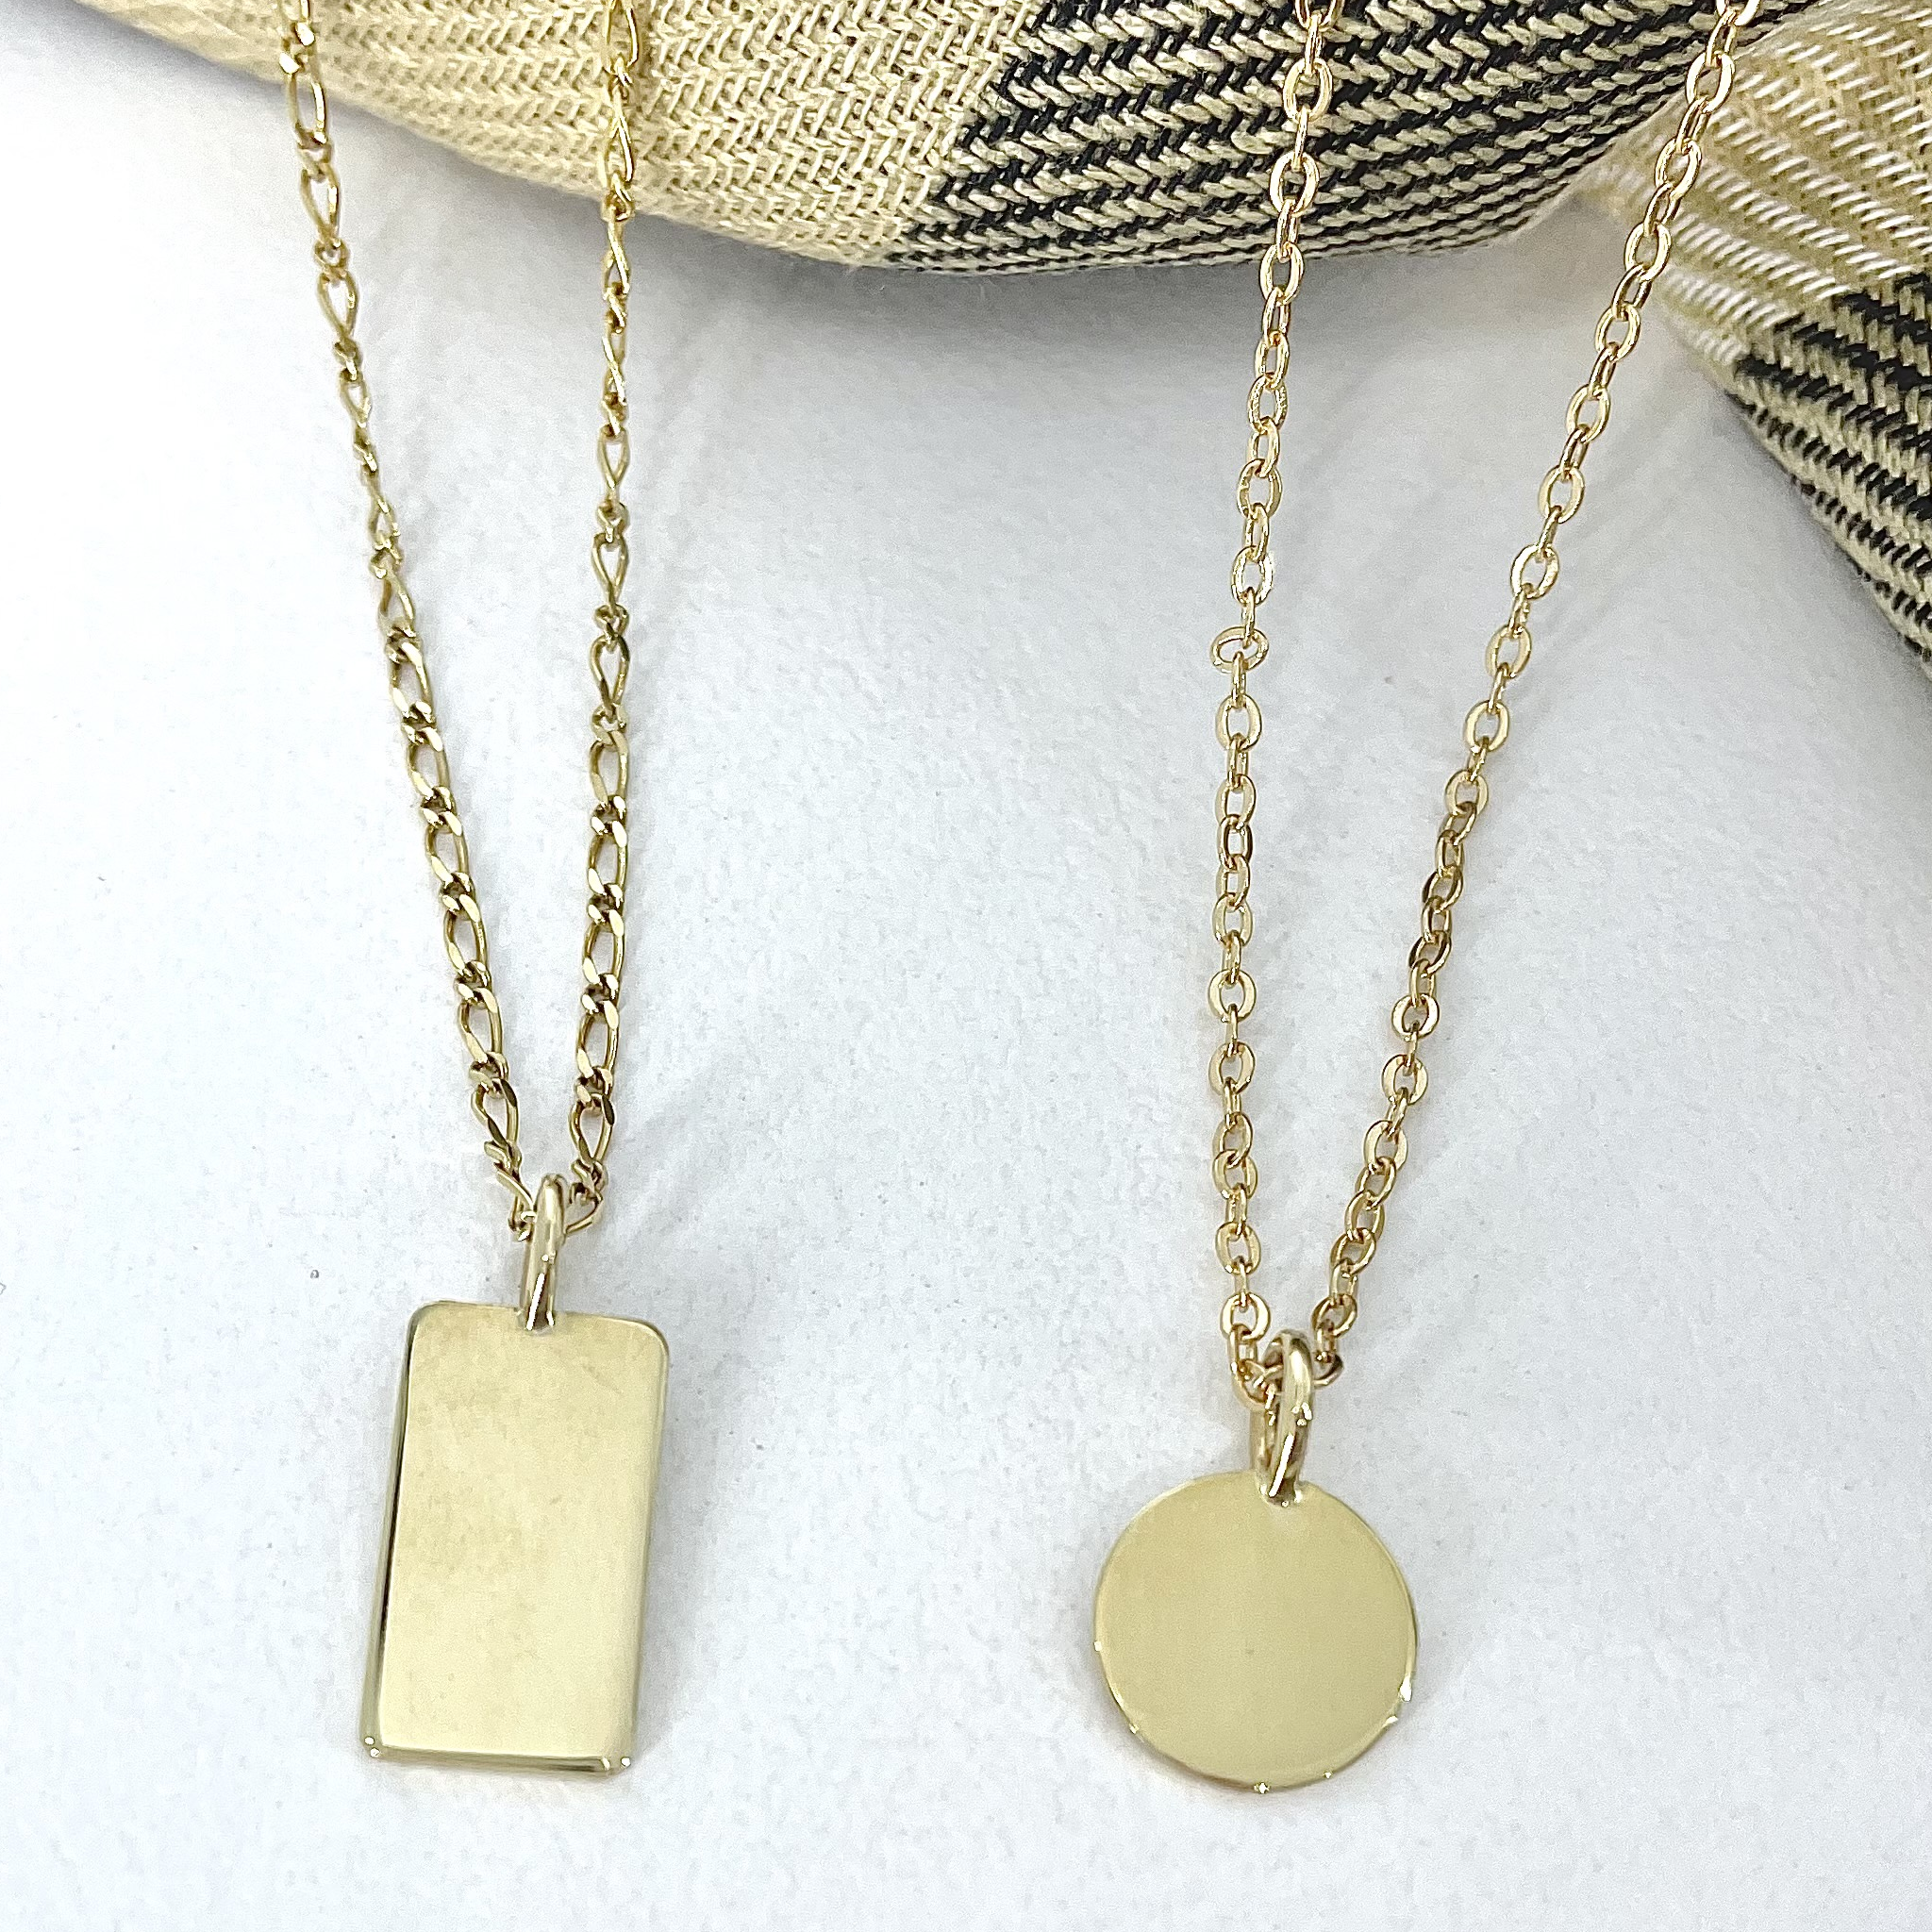 Gold Bar Necklace - Gold Bar Pendant Necklace | The Glam Kit